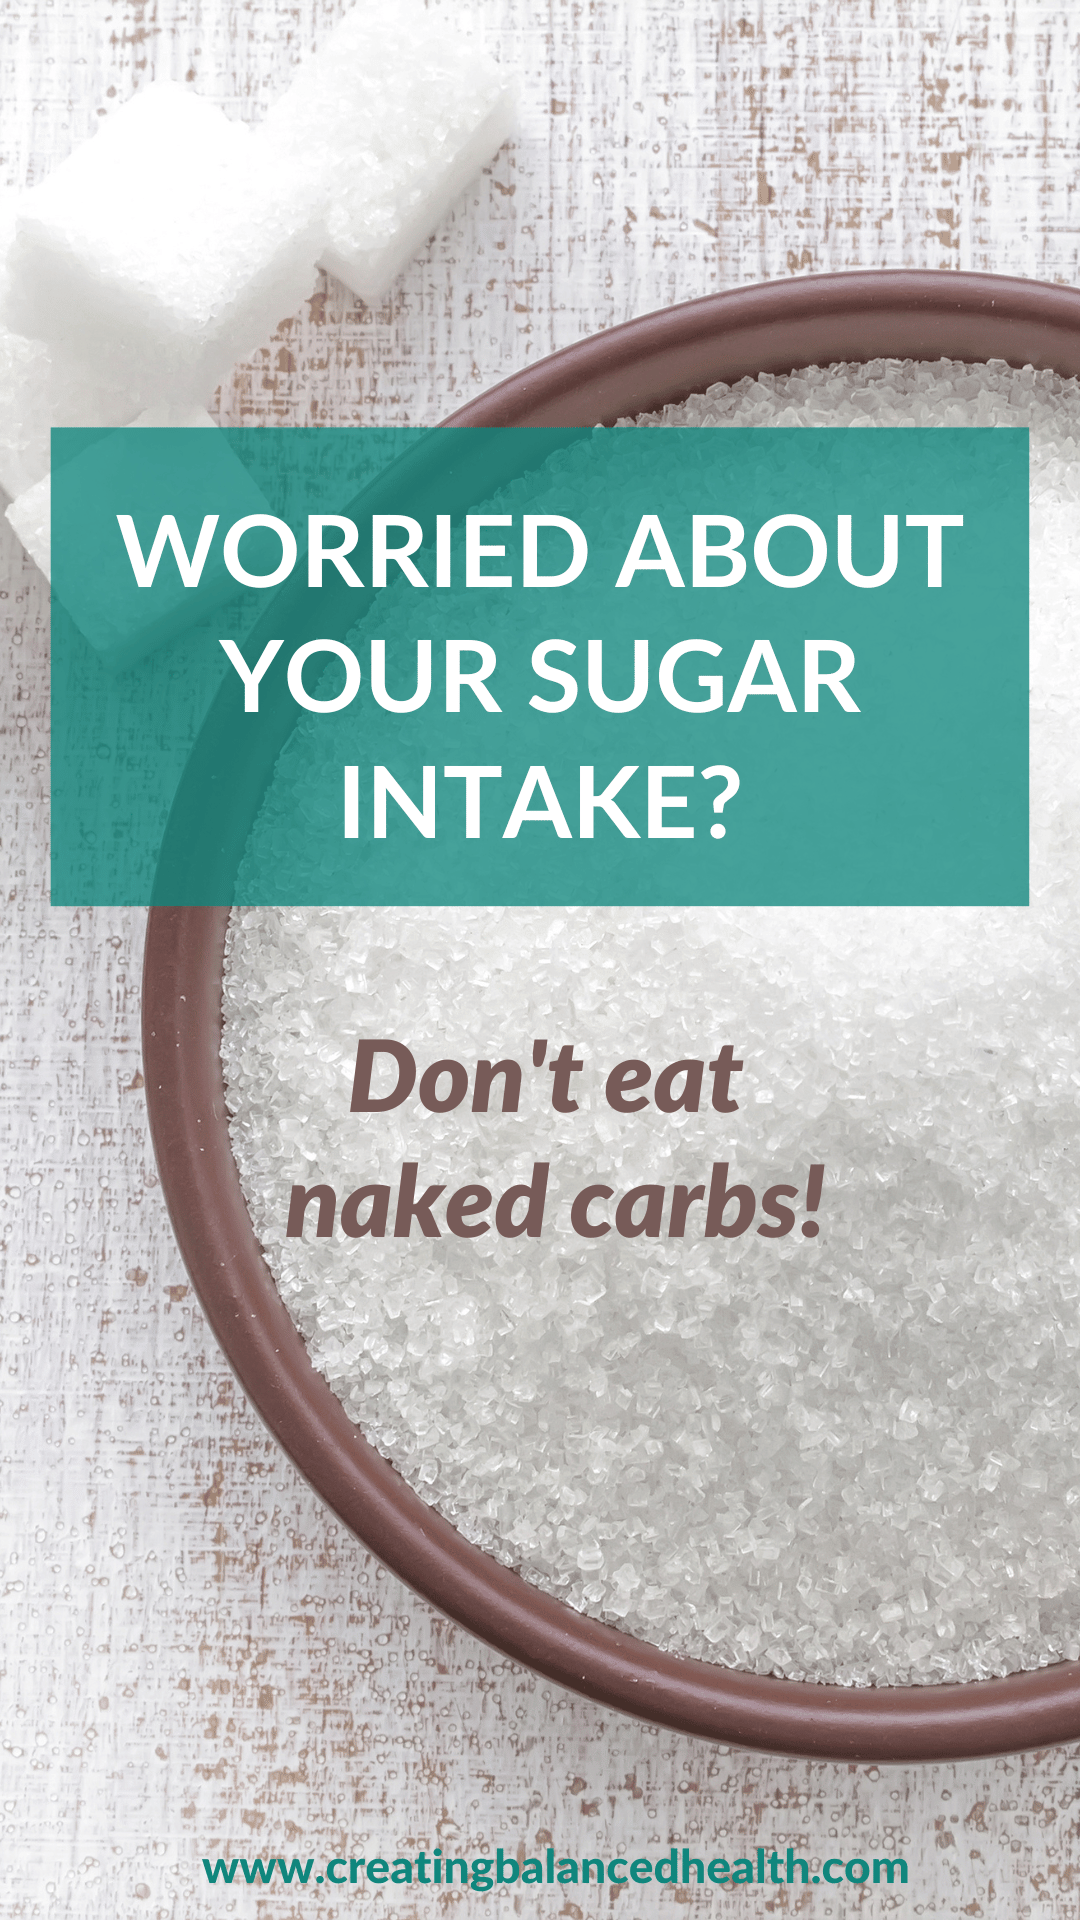 Bowl of white sugar on table with sugar cubes with text saying worried about sugar intake? Don't eat naked carbs